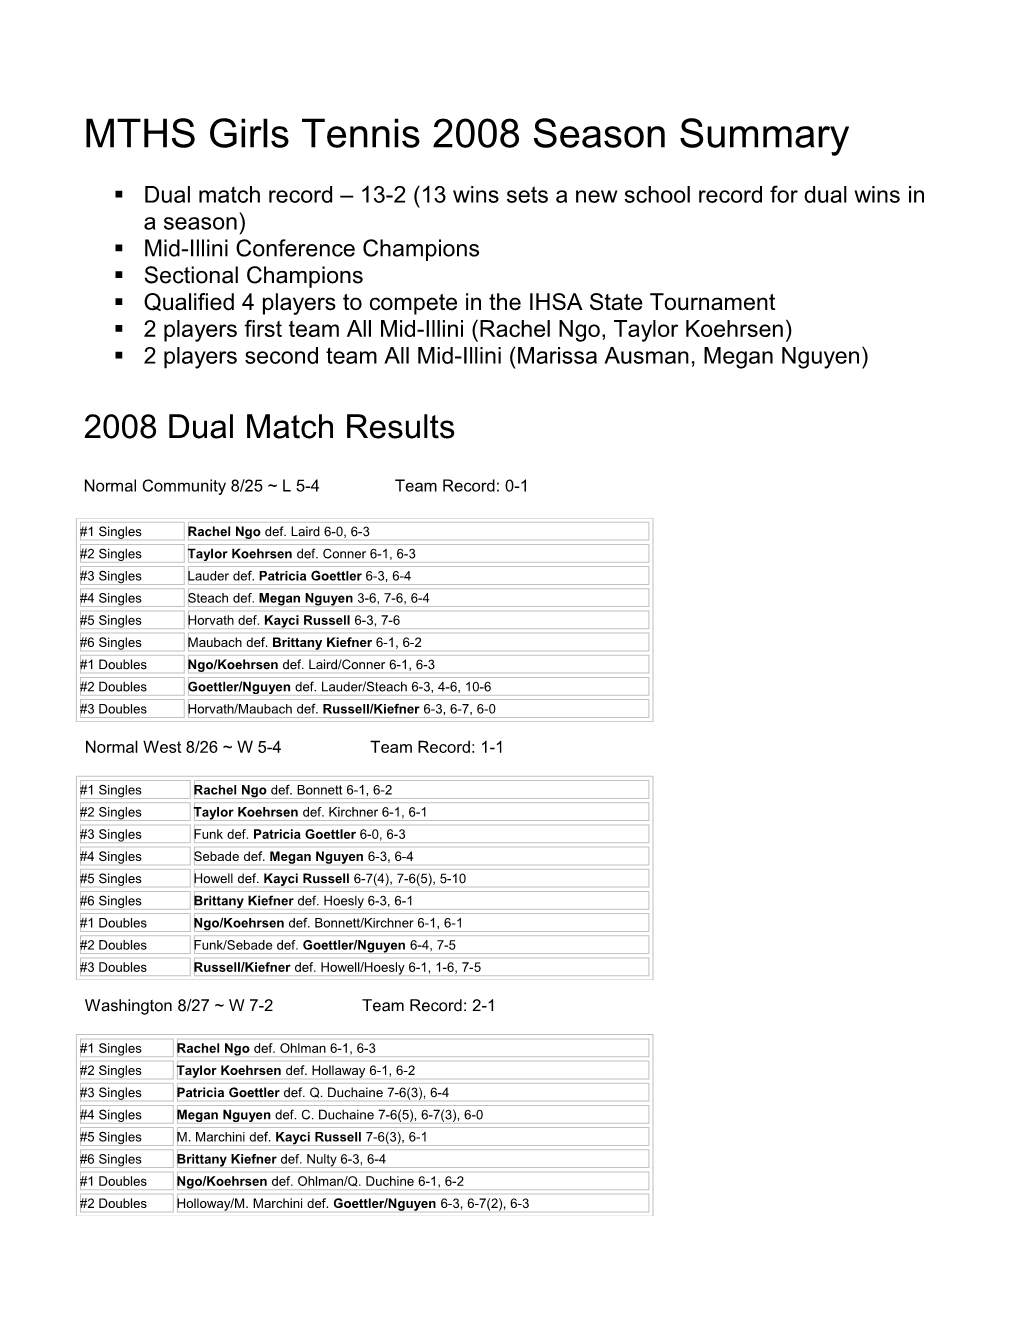 MTHS Girls Tennis 2008 Dual Match Resultsthe Metamora Player Is Highlighted in Red